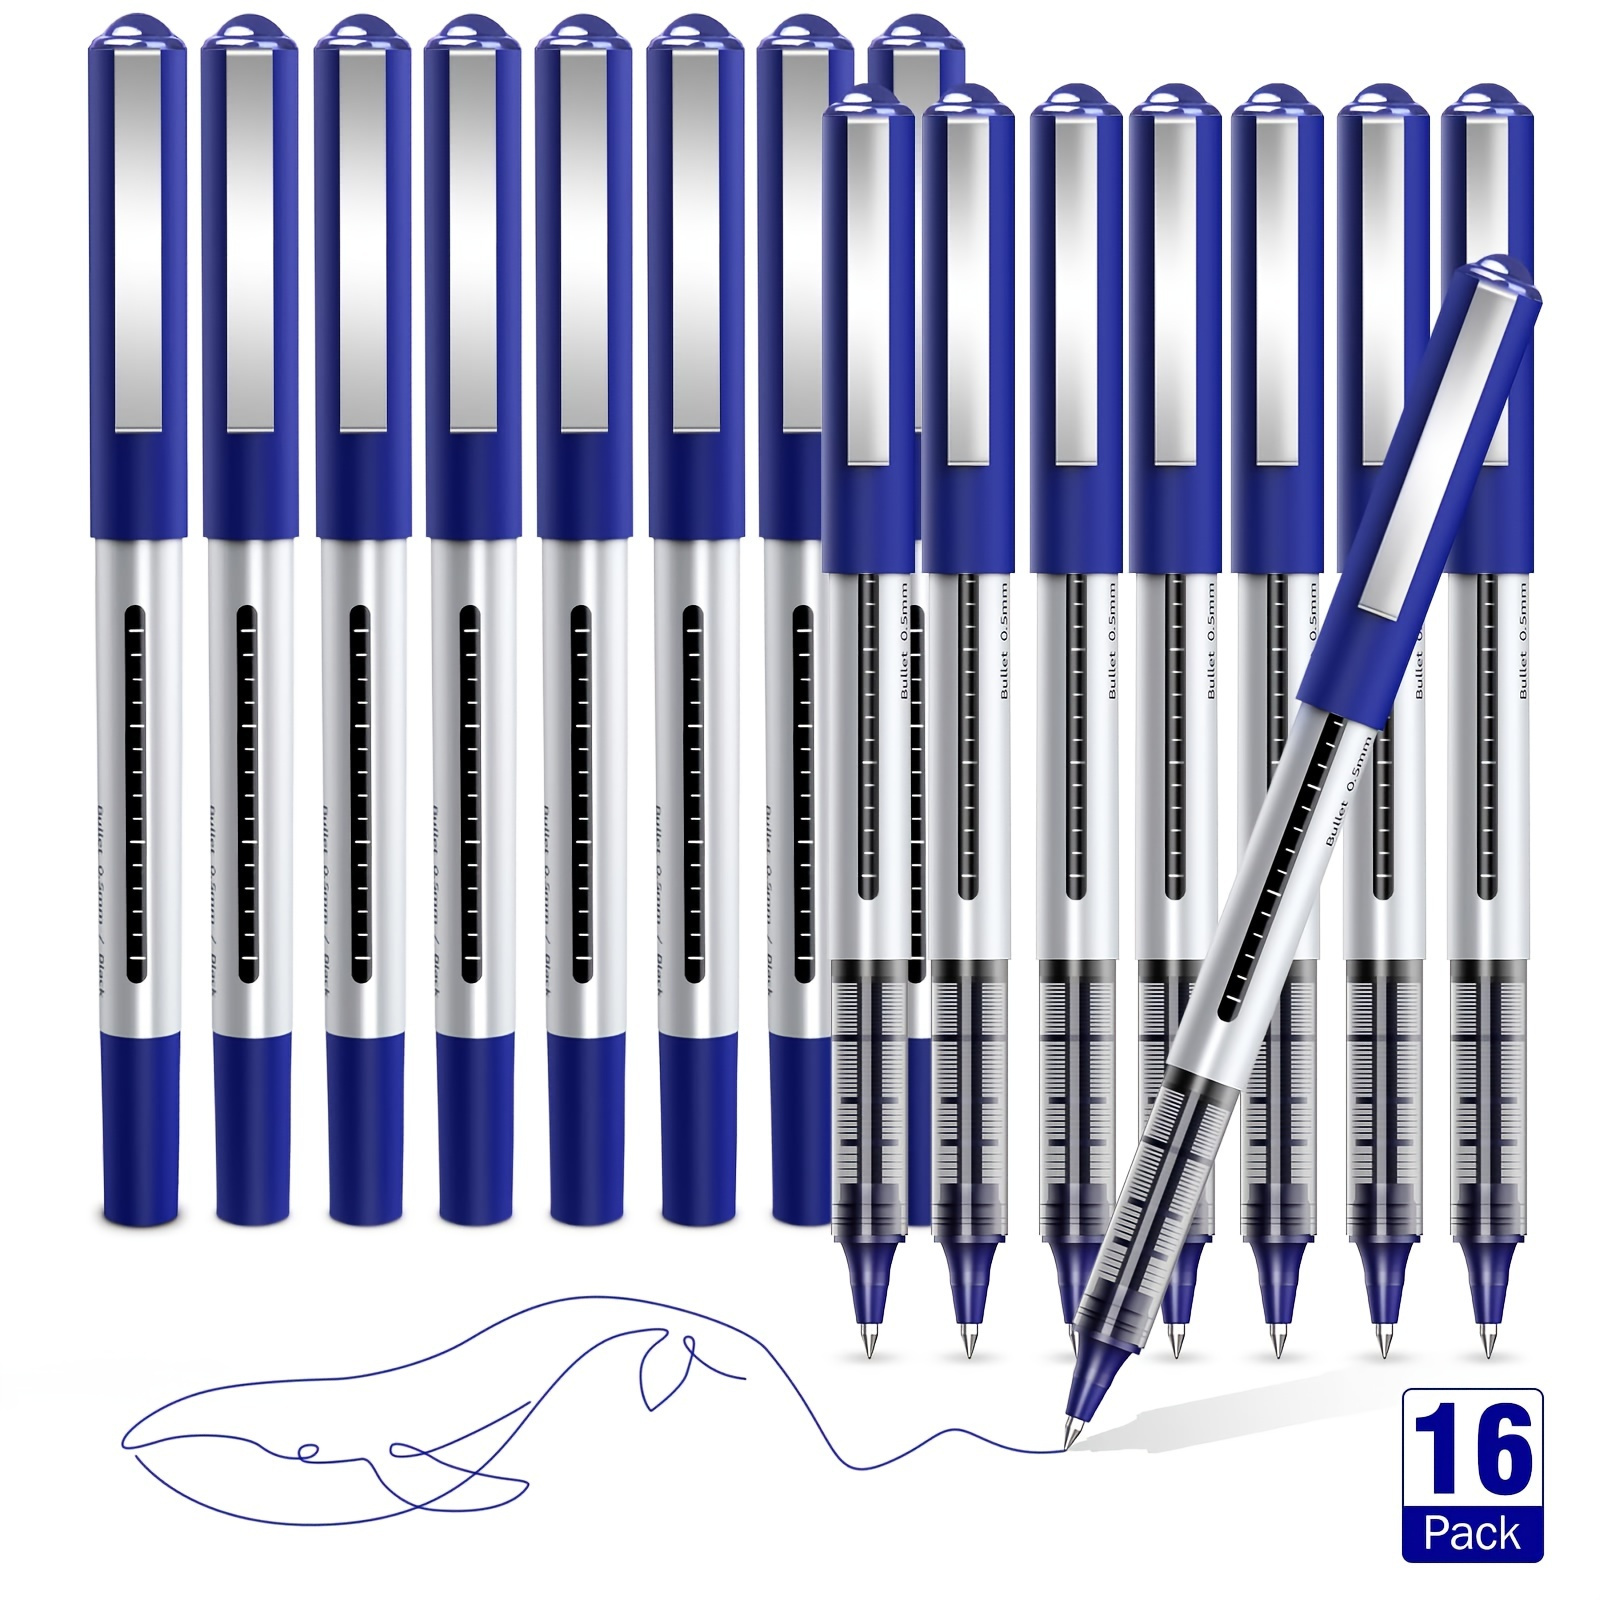 

12 Pieces Rolling Ball Pens, Quick-drying Ink 0.5 Mm Extra Fine Point Pens Liquid Ink Pen Rollerball Pens (blue)